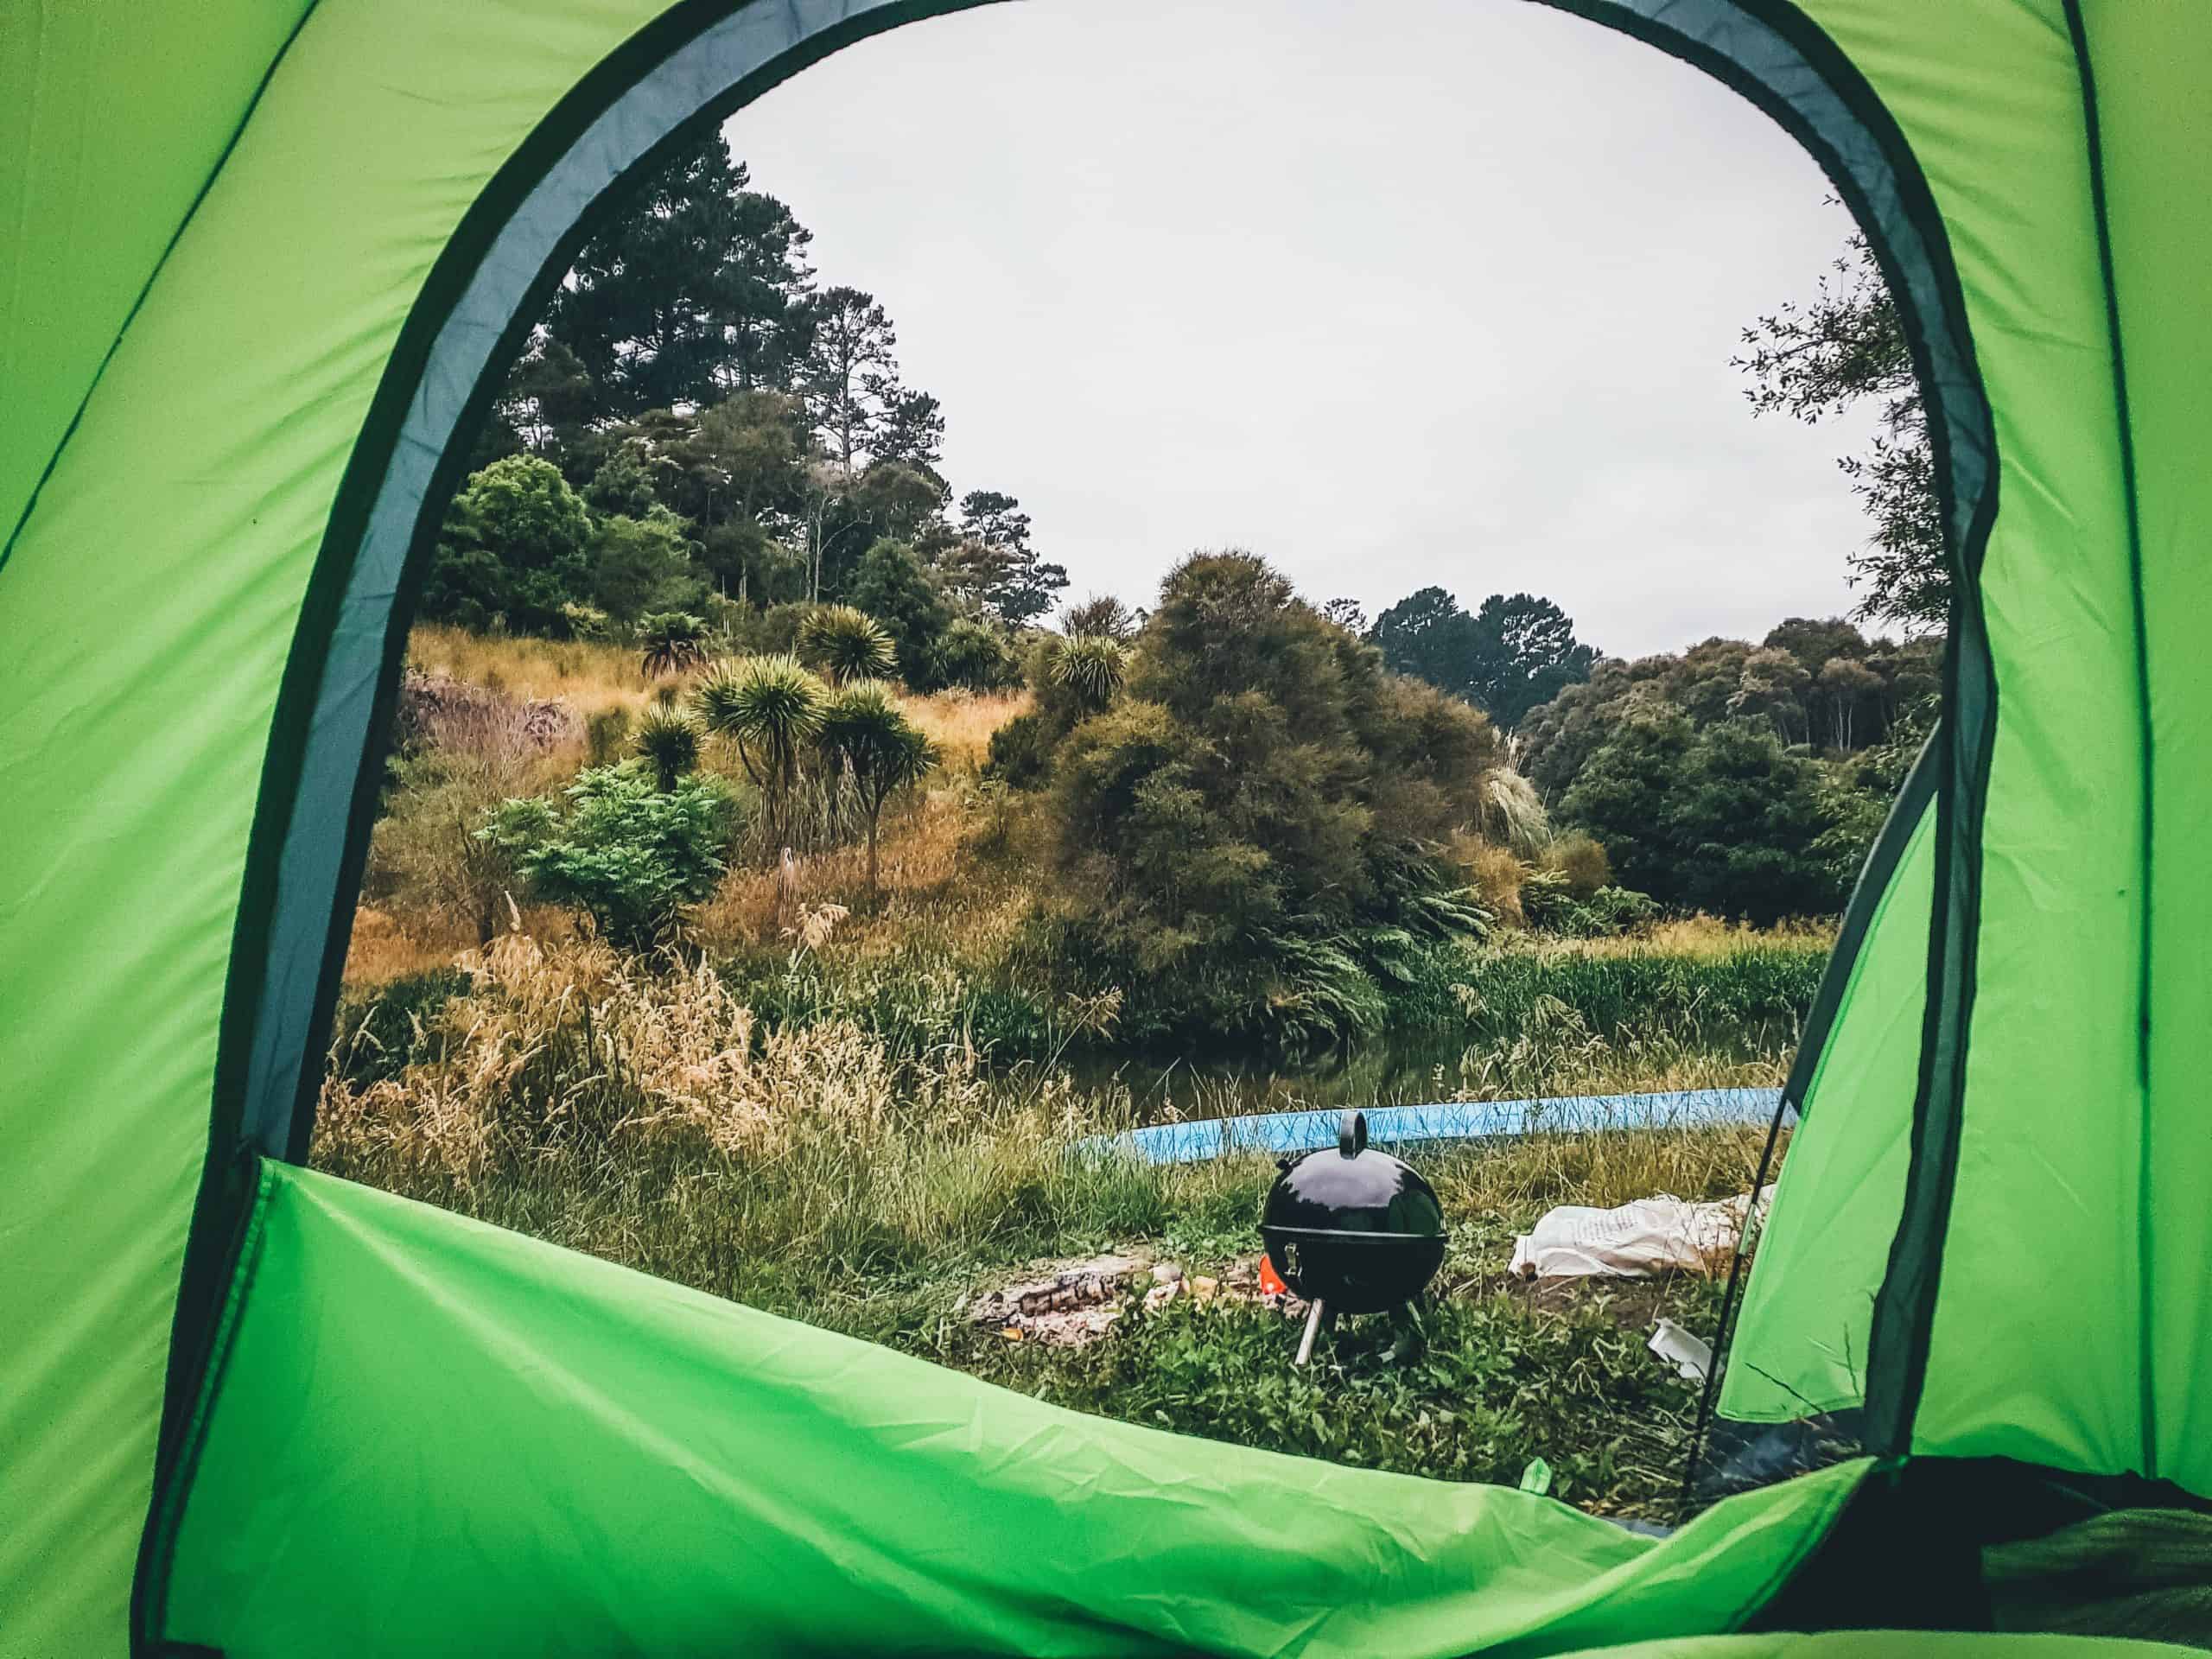 travel at home by camping in your back yard